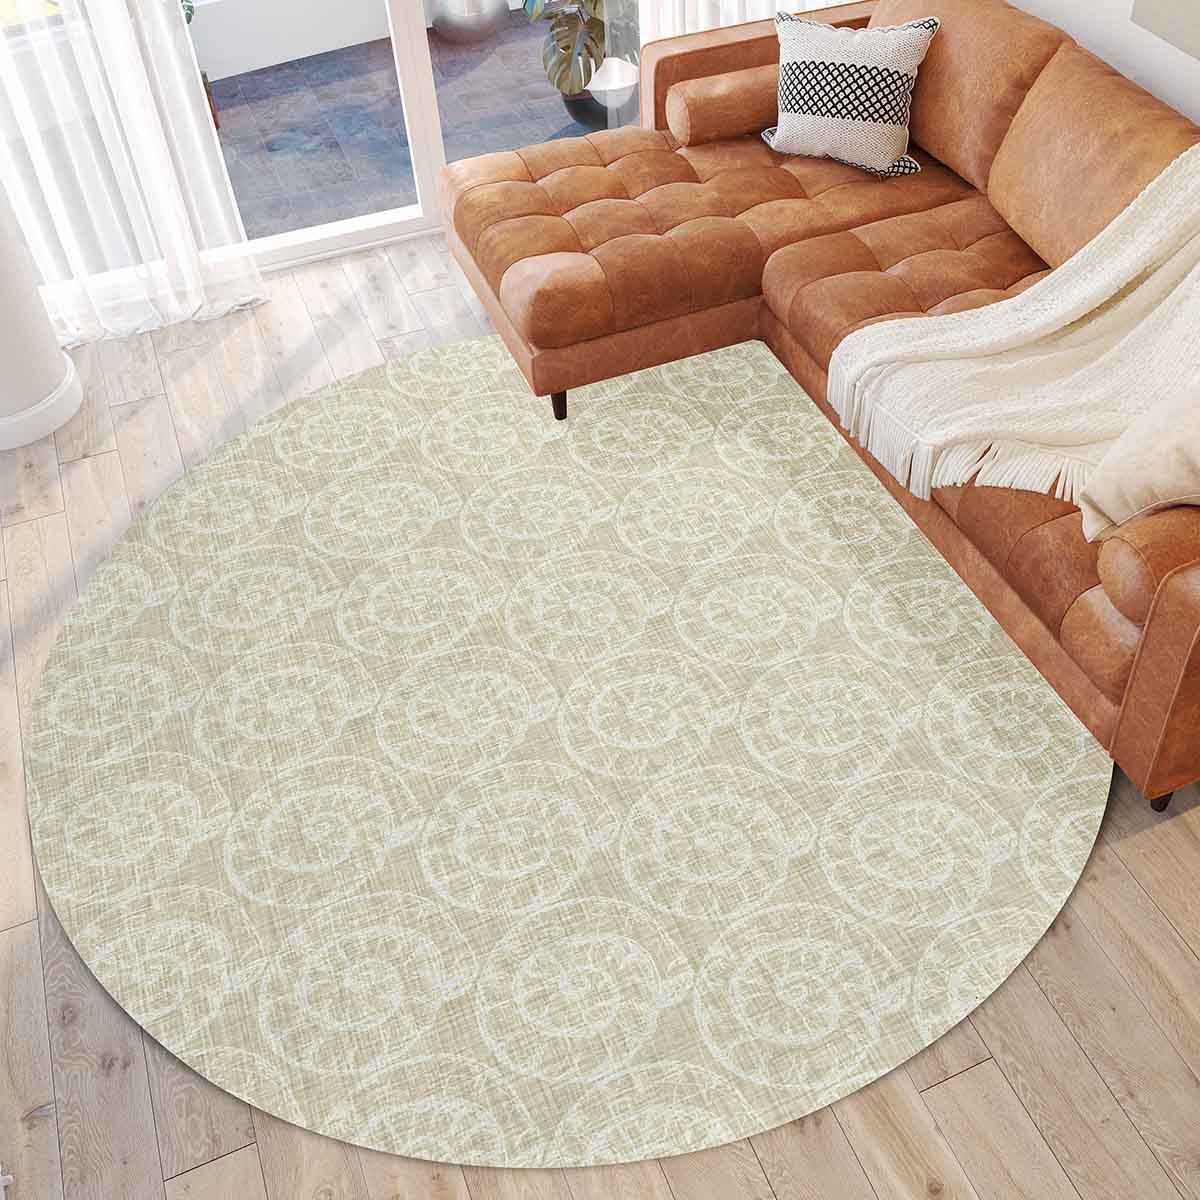 Seabreeze Taupe Chenille Rug (SZ11)